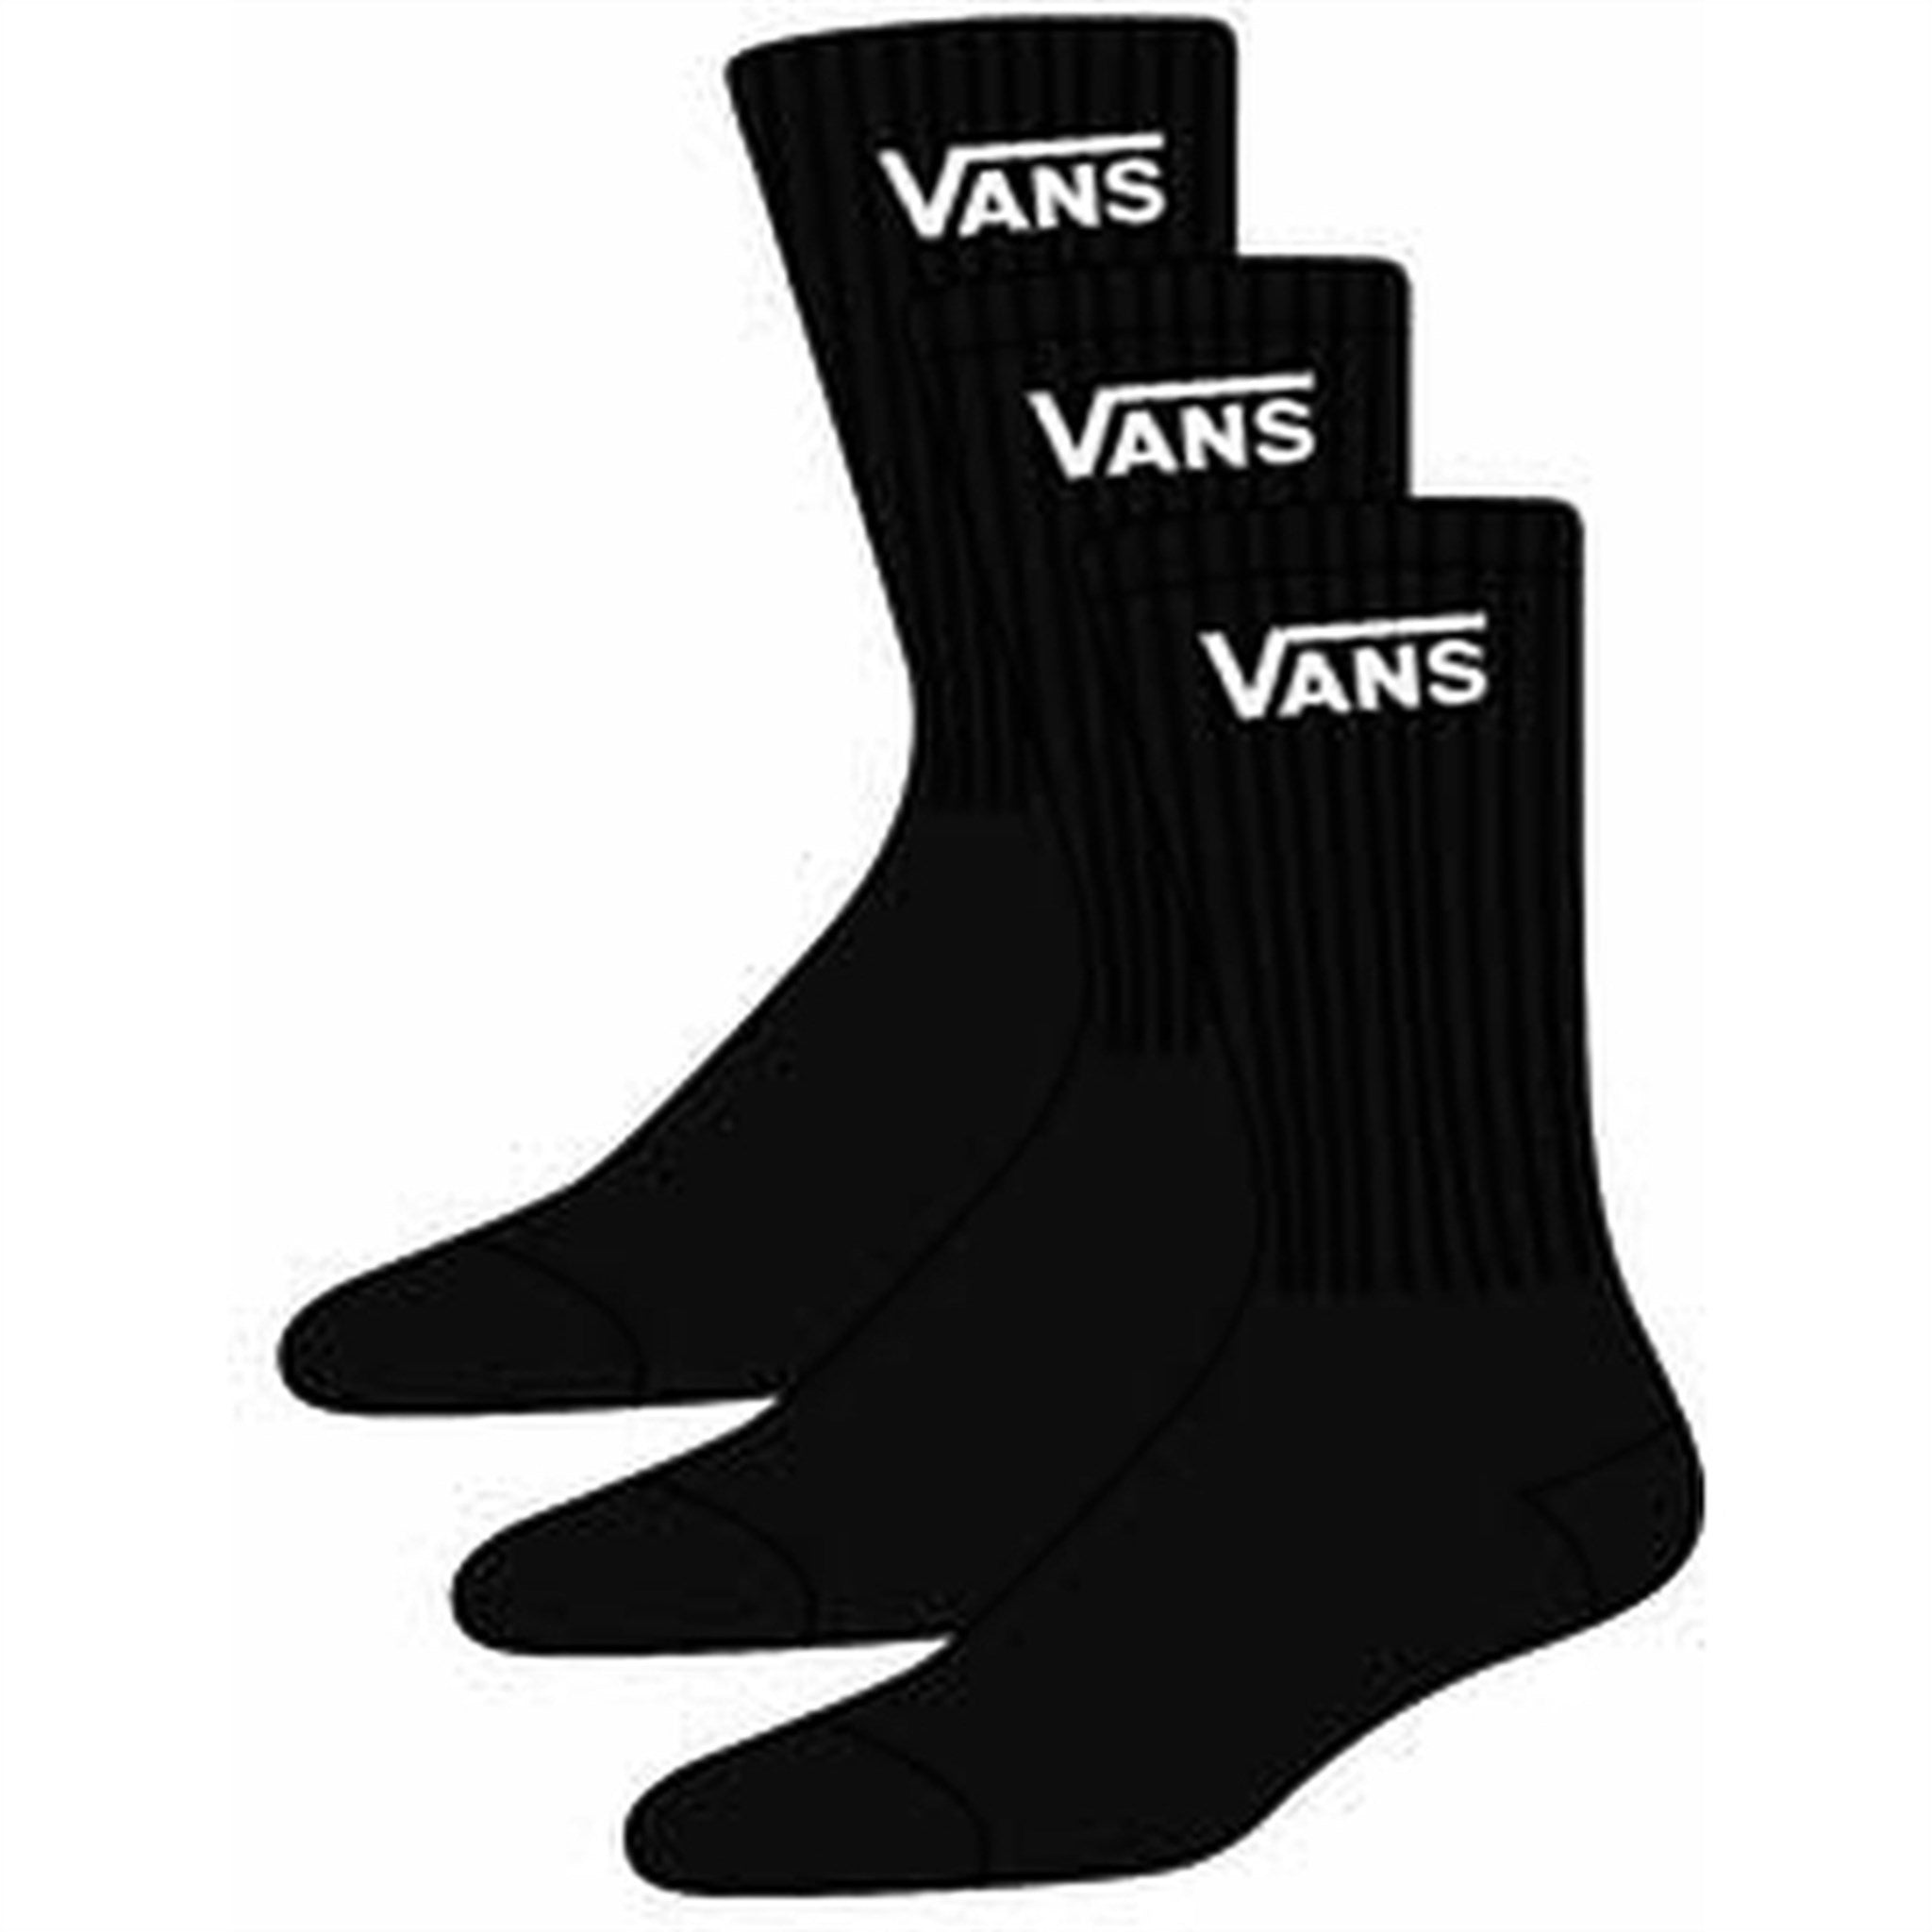 VANS By Classic Crew Youth Socks 3-Pack Black